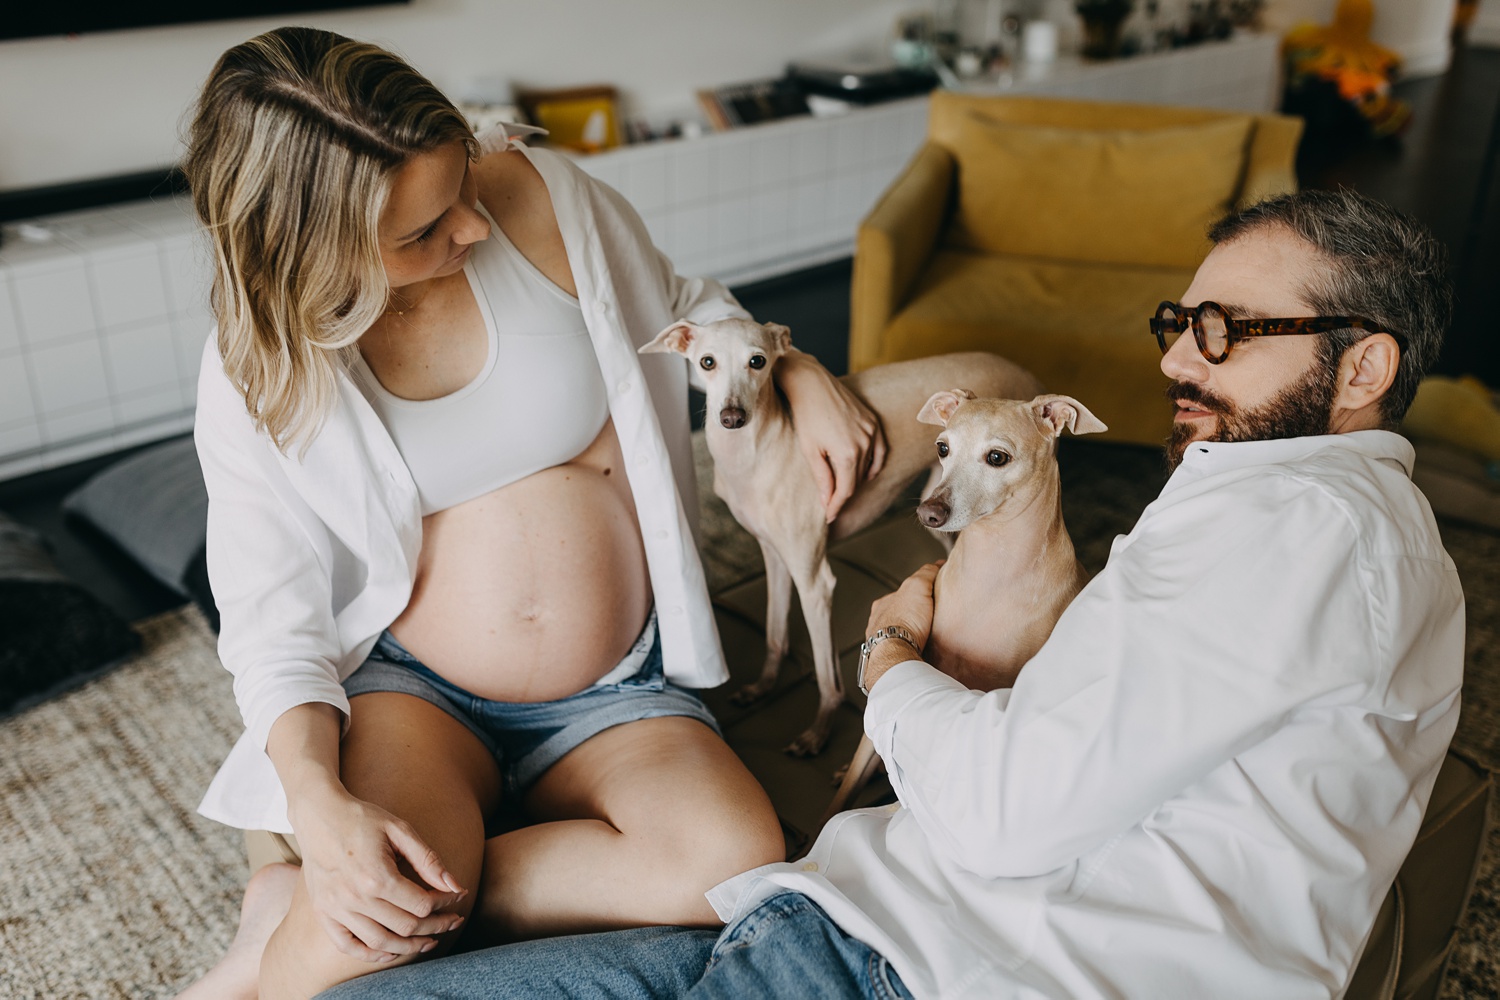 Maternity photoshoot with adorable Italian Greyhounds adding joy to the cozy home atmosphere